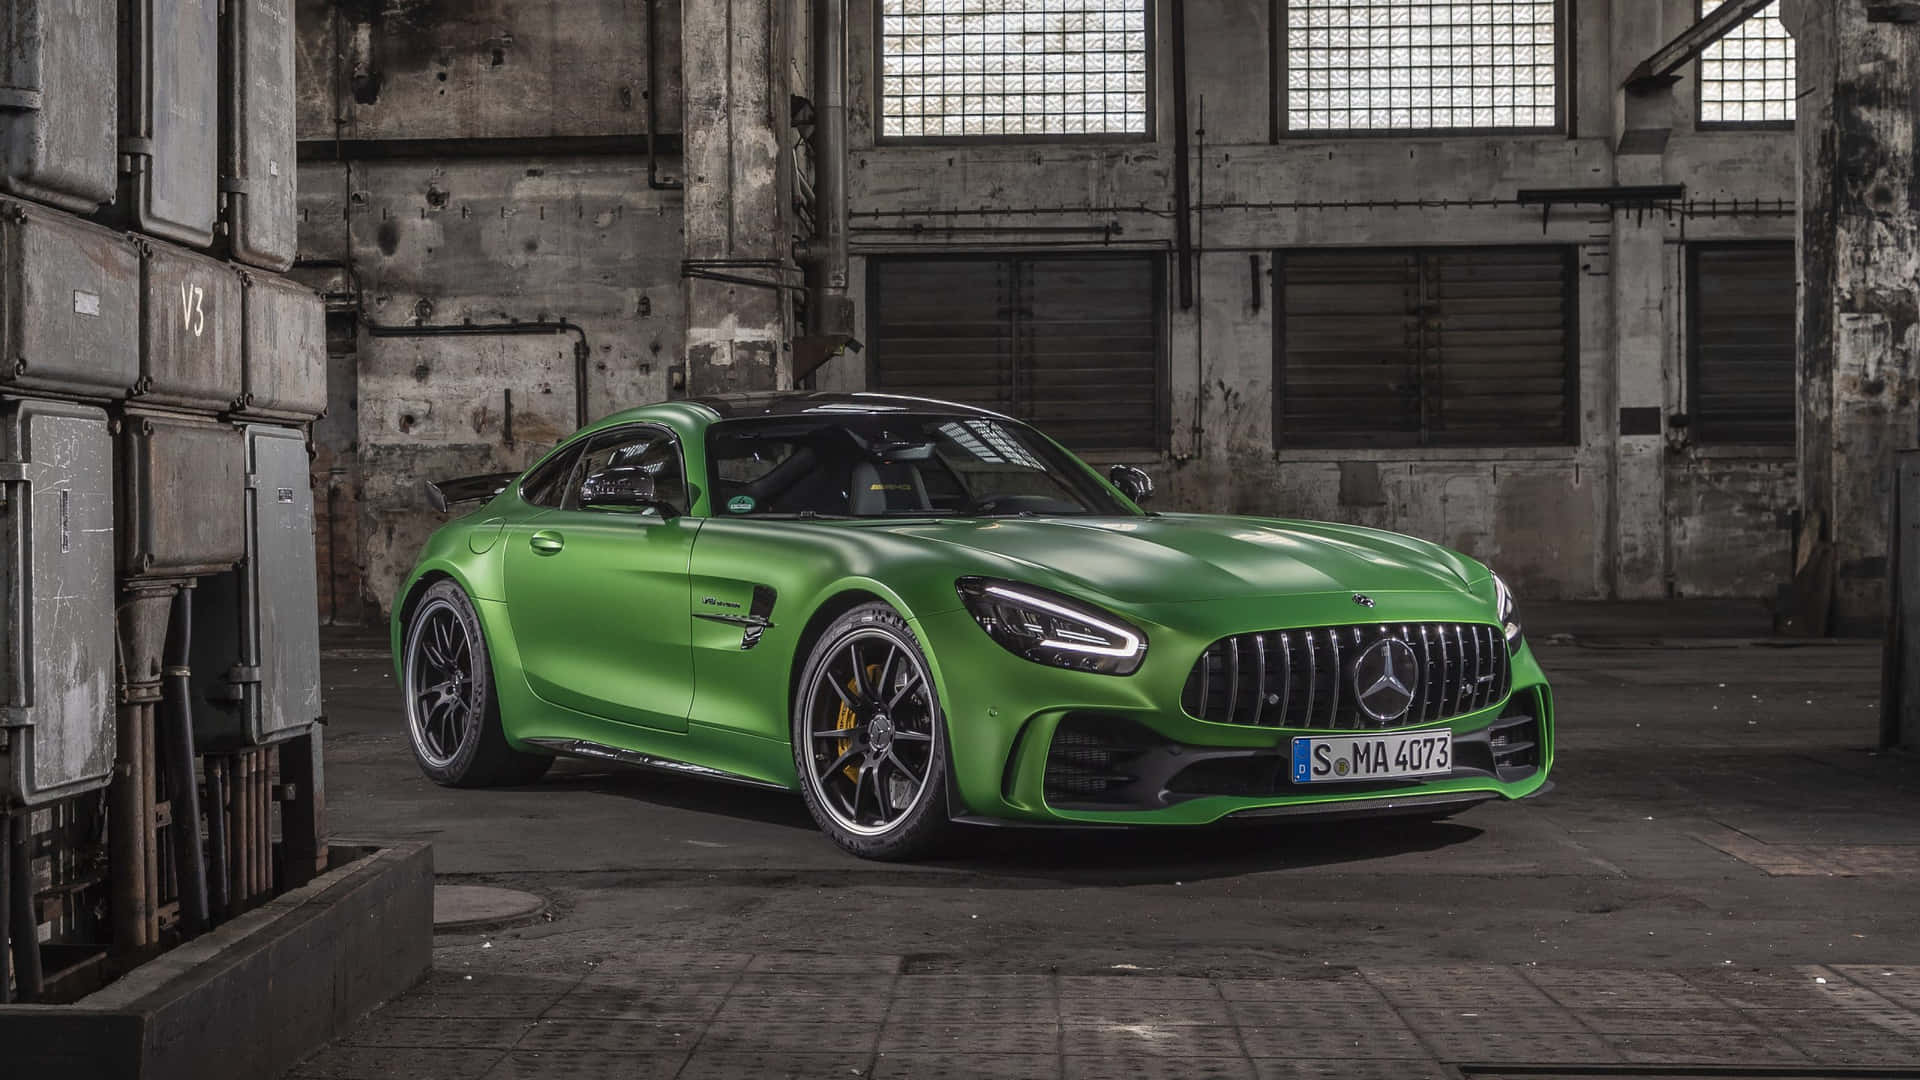 Green Mercedes Amg Gt R With Abandon Building Background